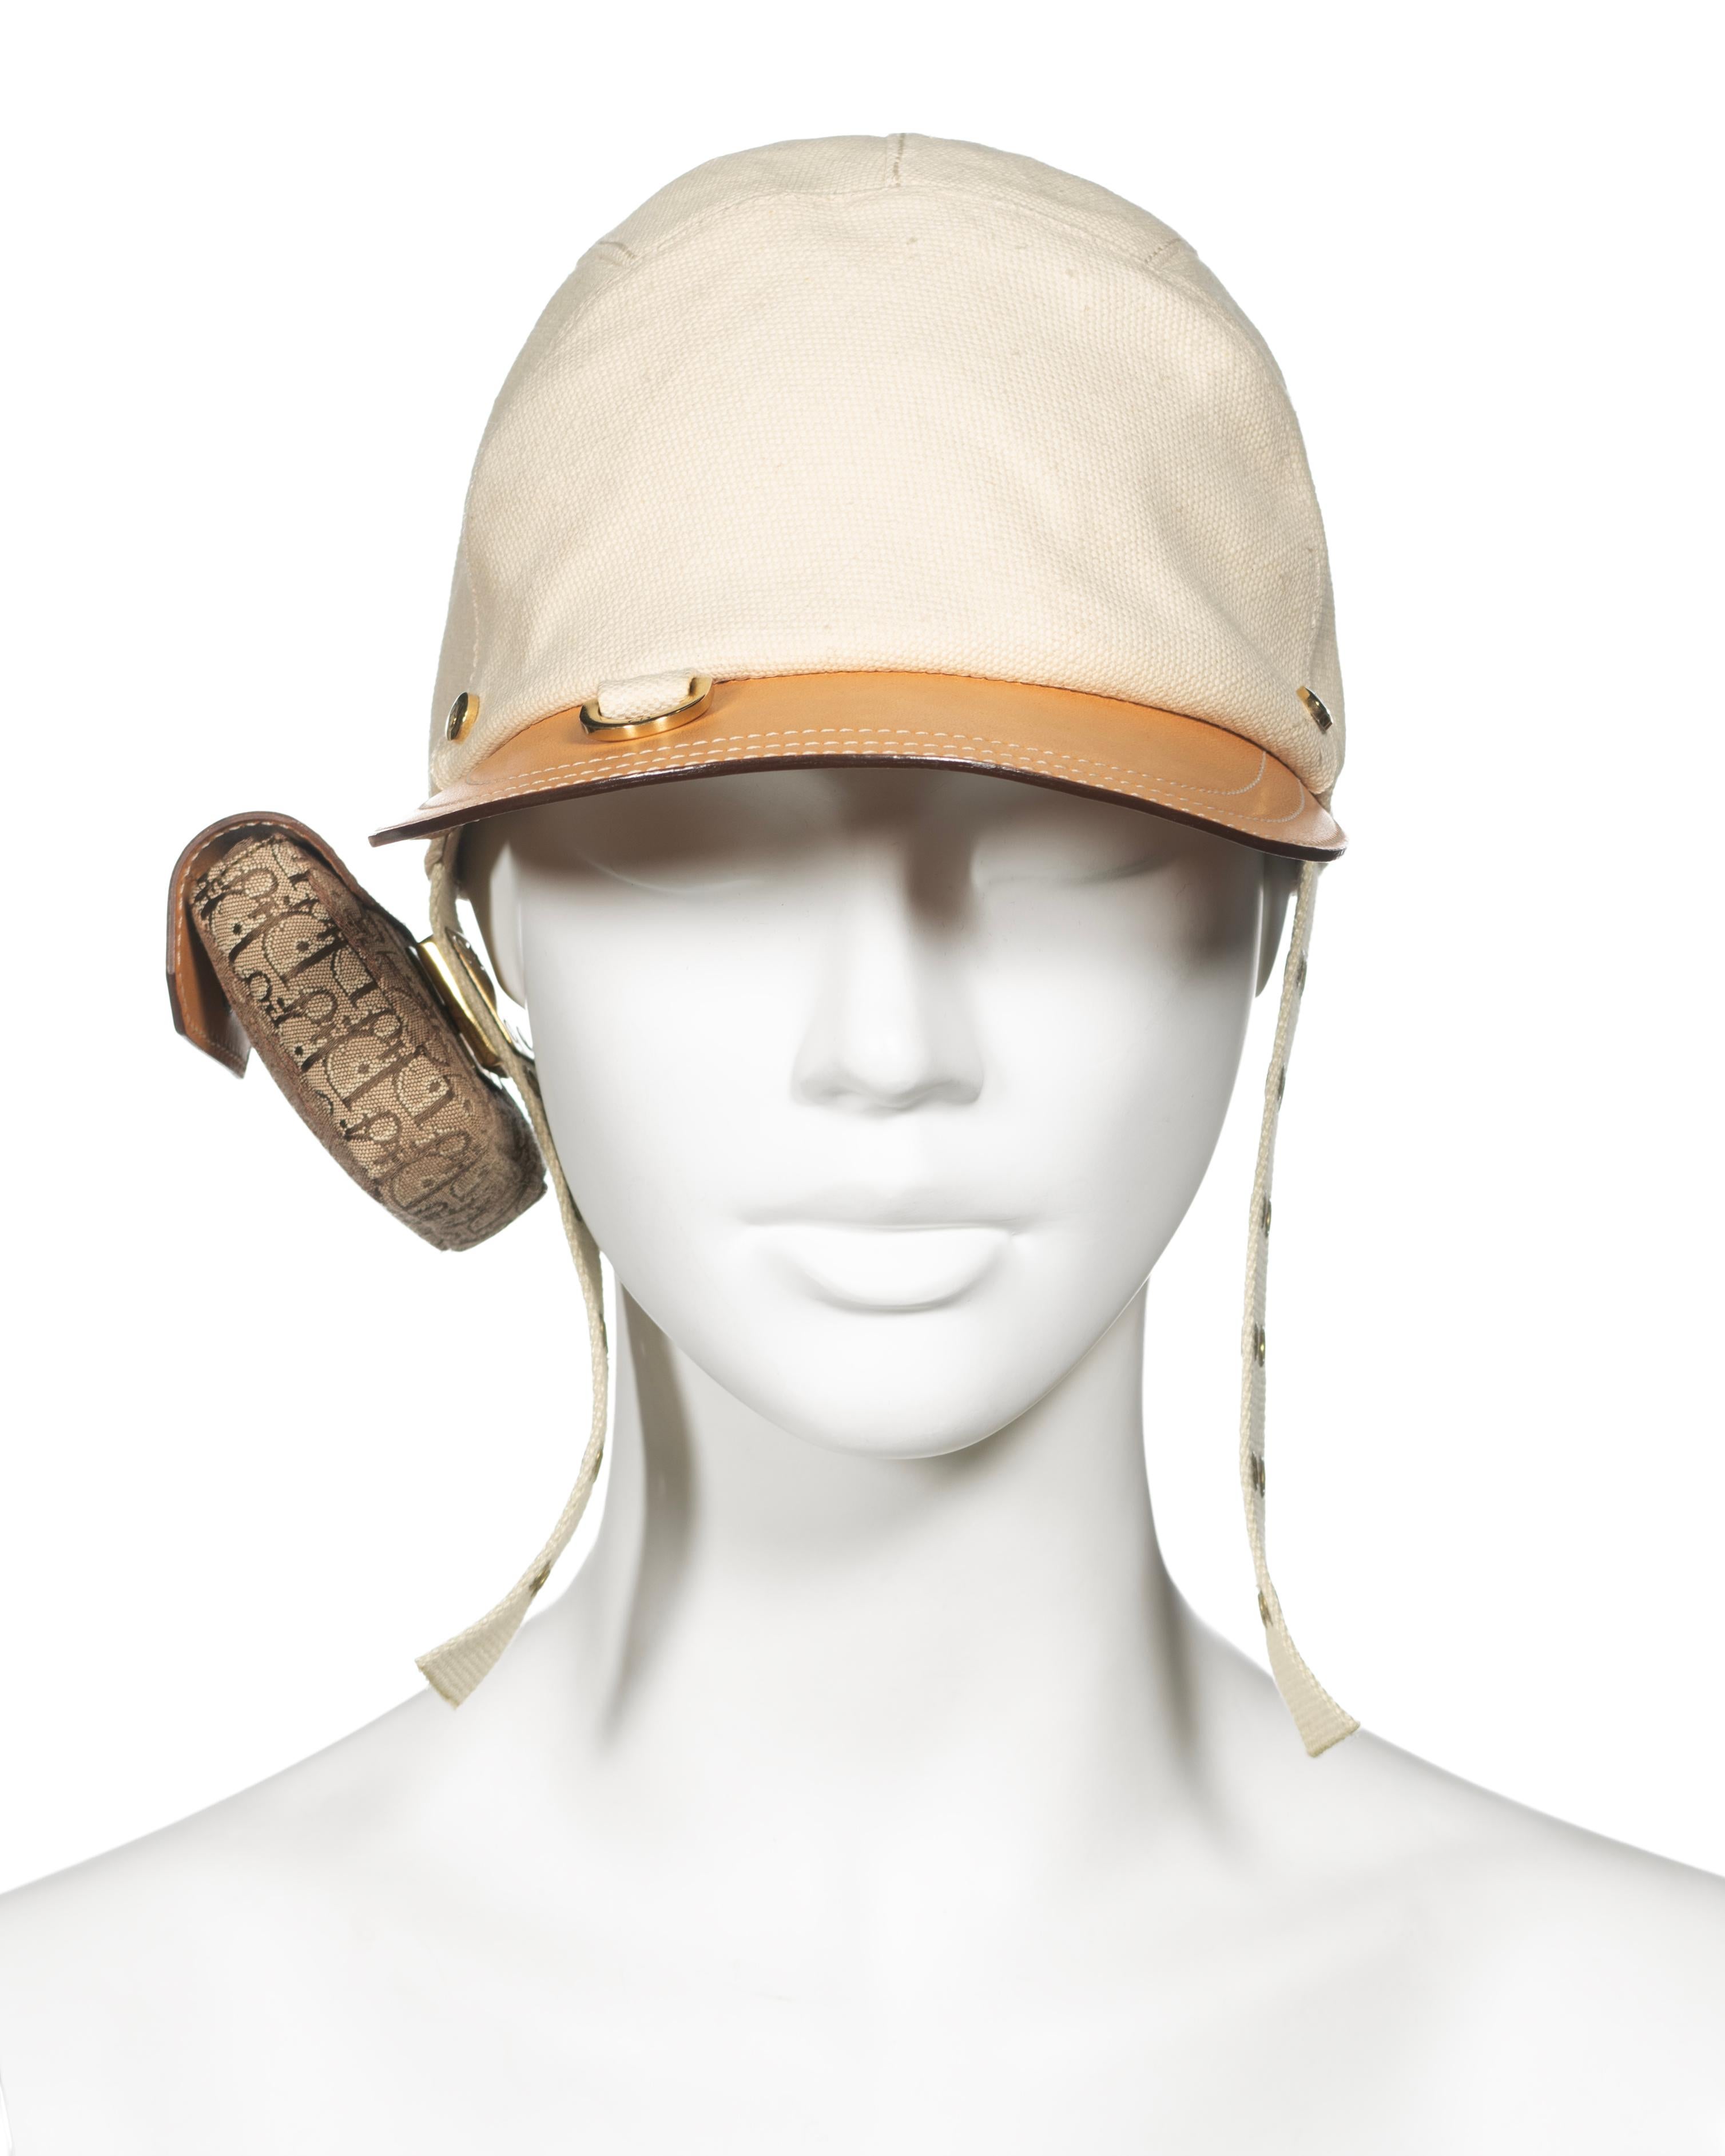 ▪ A Rare Christian Dior Cap
▪ Creative Director: John Galliano
▪ Spring-Summer 2002
▪ Sold by One of a Kind Archive
▪ Crafted from robust cream cotton canvas
▪ Tan leather visor featuring cream contrast stitch trim, adorned with a gilded gold D-ring